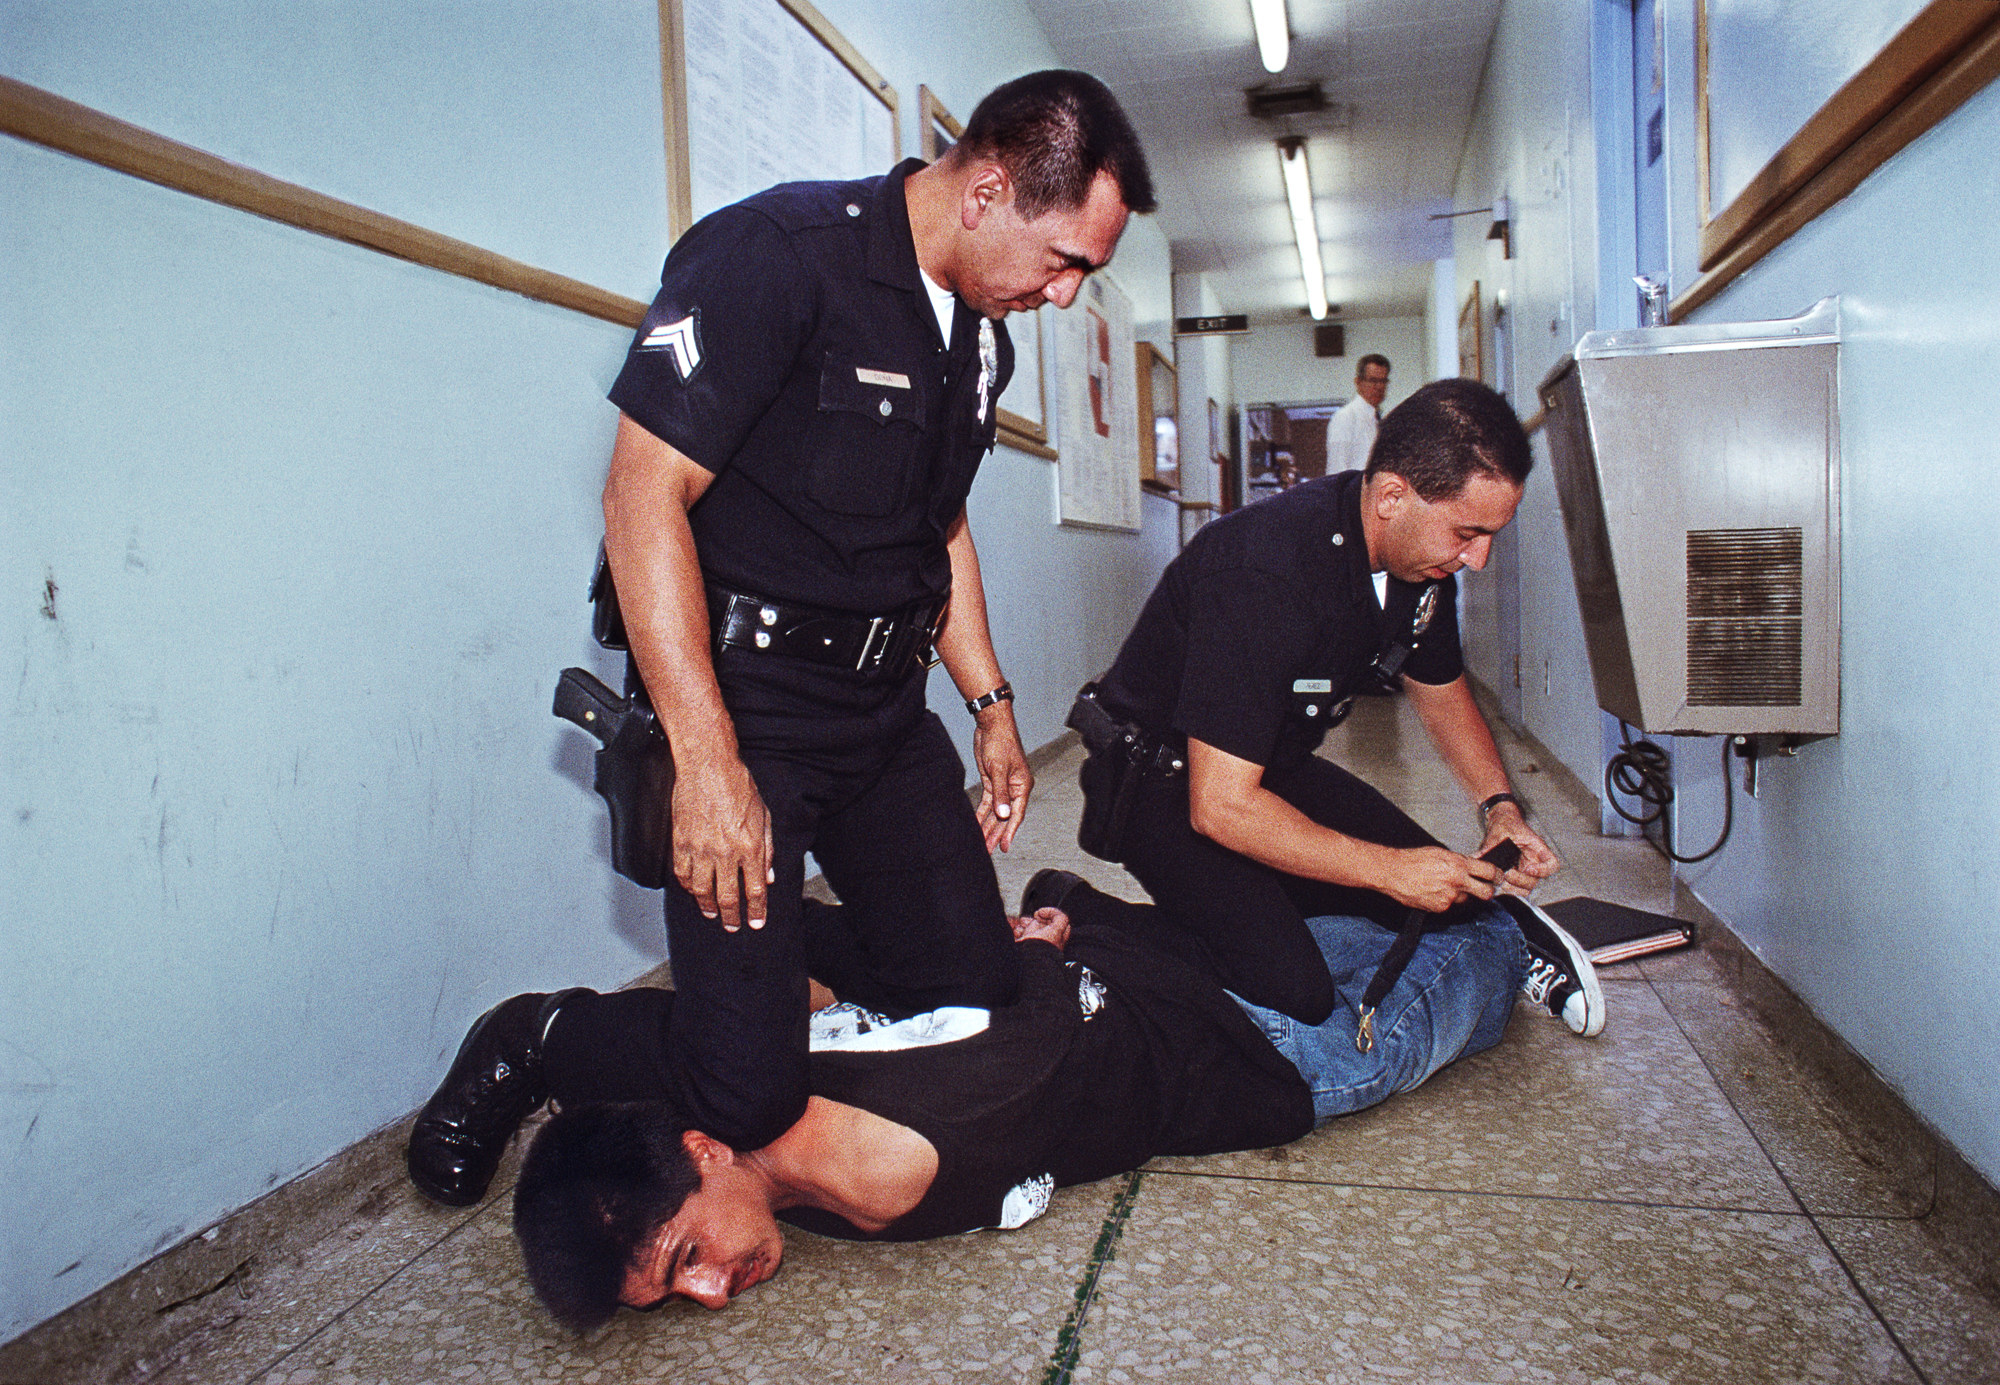 Two cops kneel on a guy in a hallway while adjusting some kind of strap